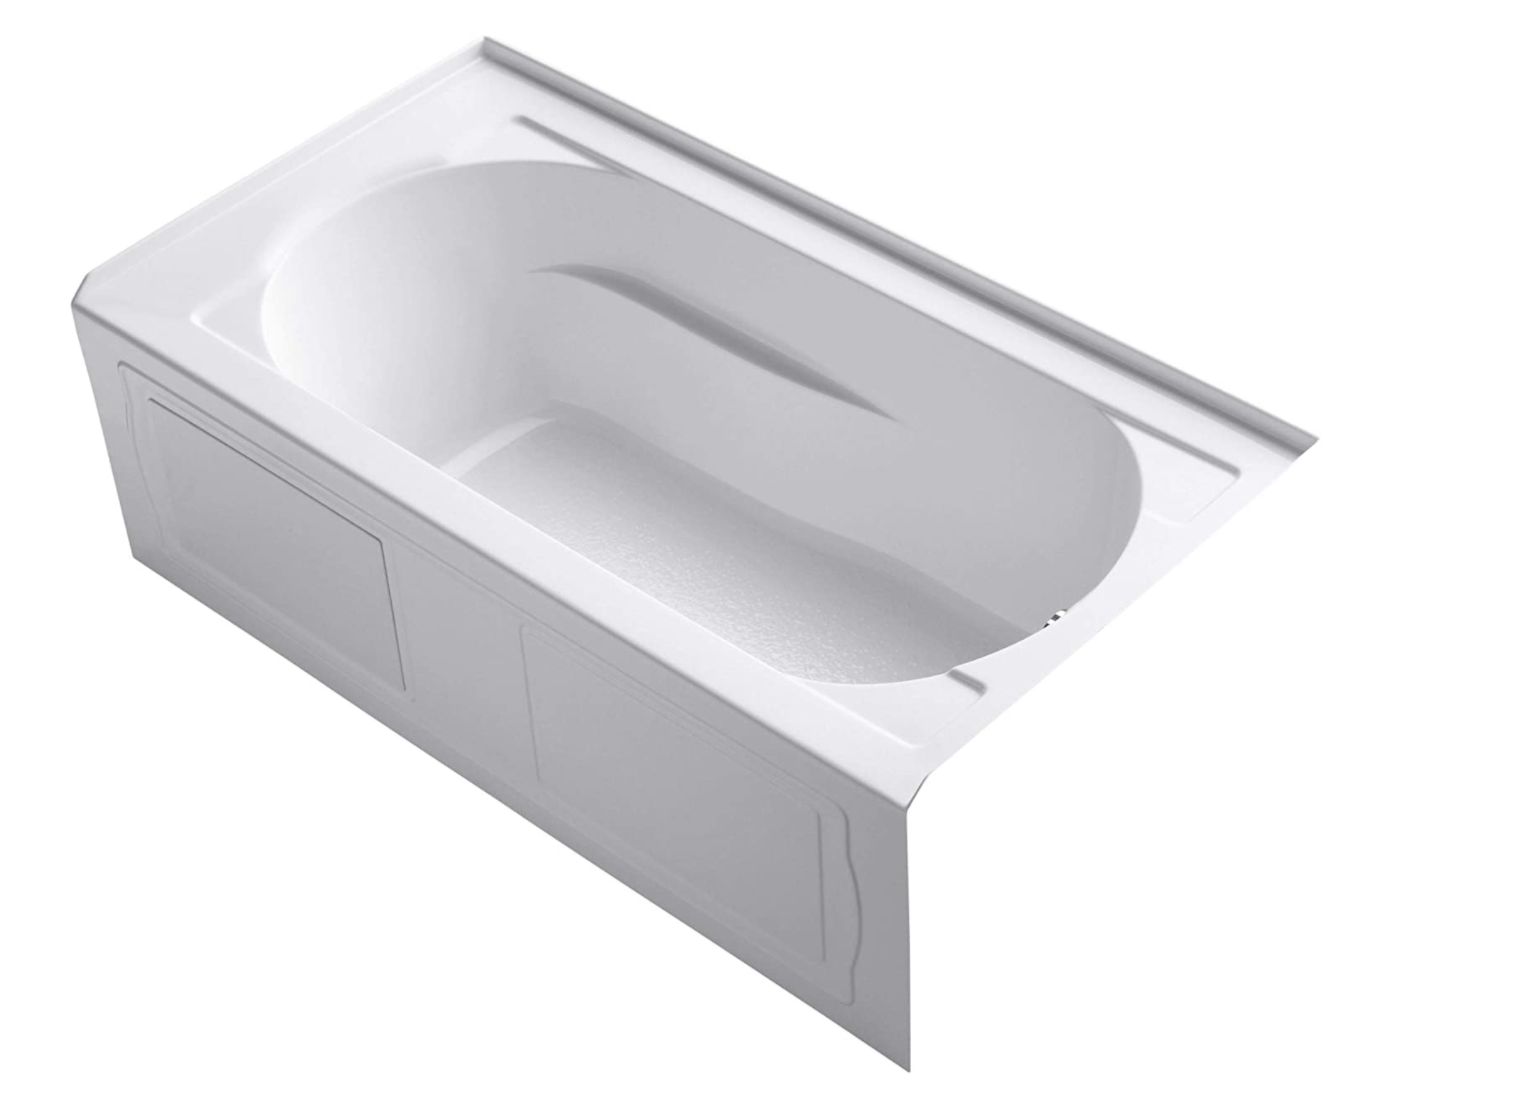 15 Best Alcove Bathtubs Review in 2023 (Buying Guide Included)